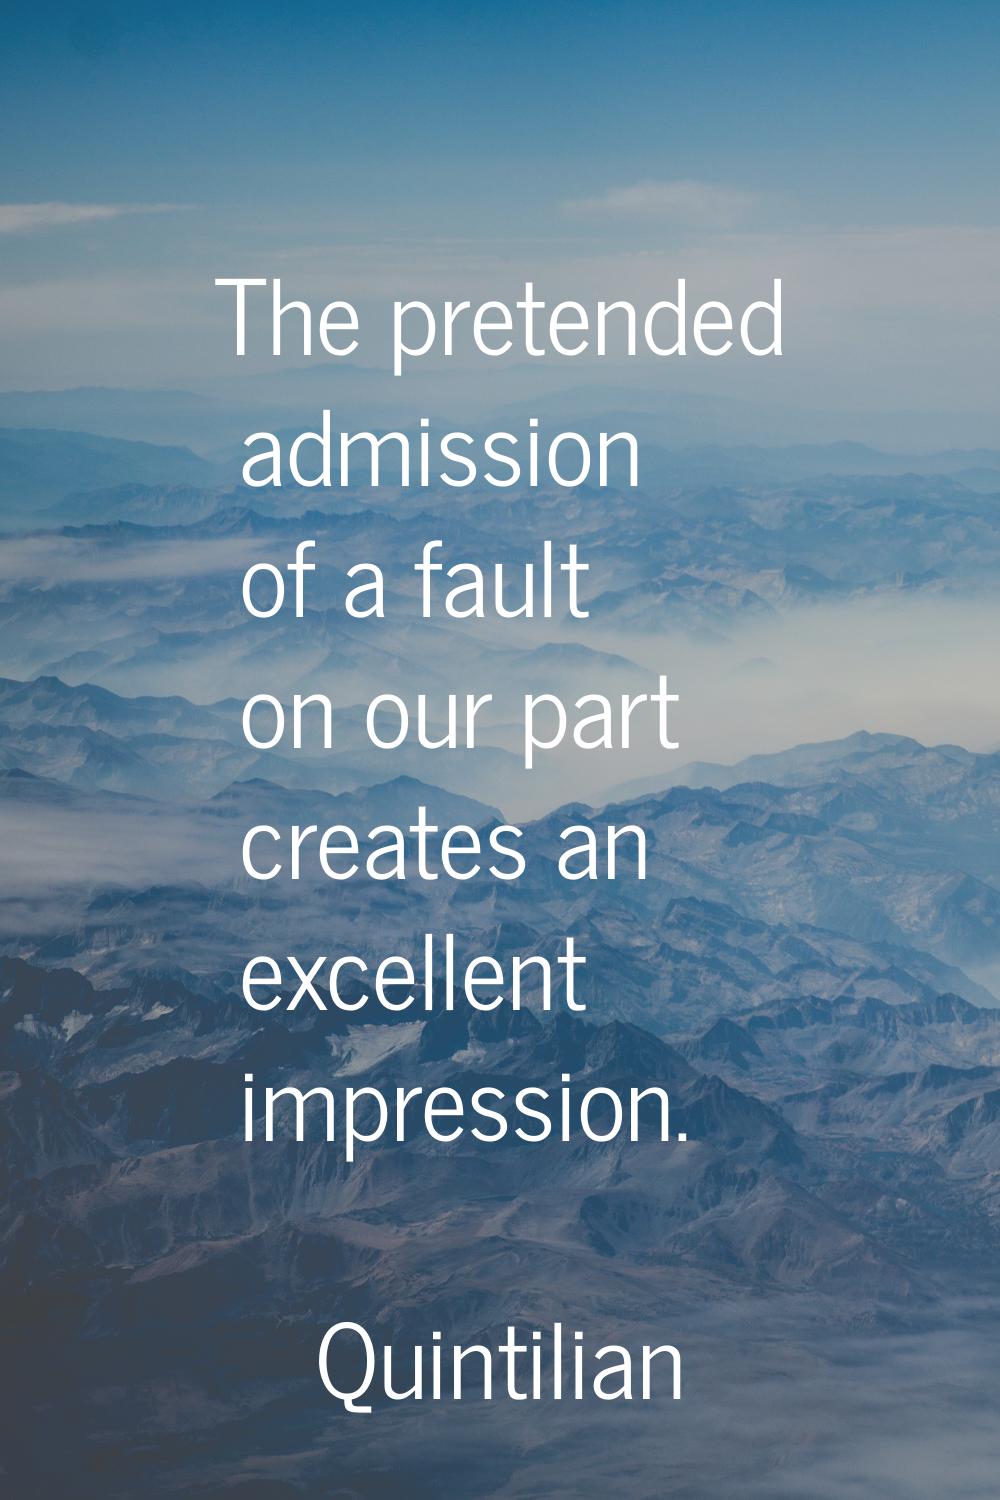 The pretended admission of a fault on our part creates an excellent impression.